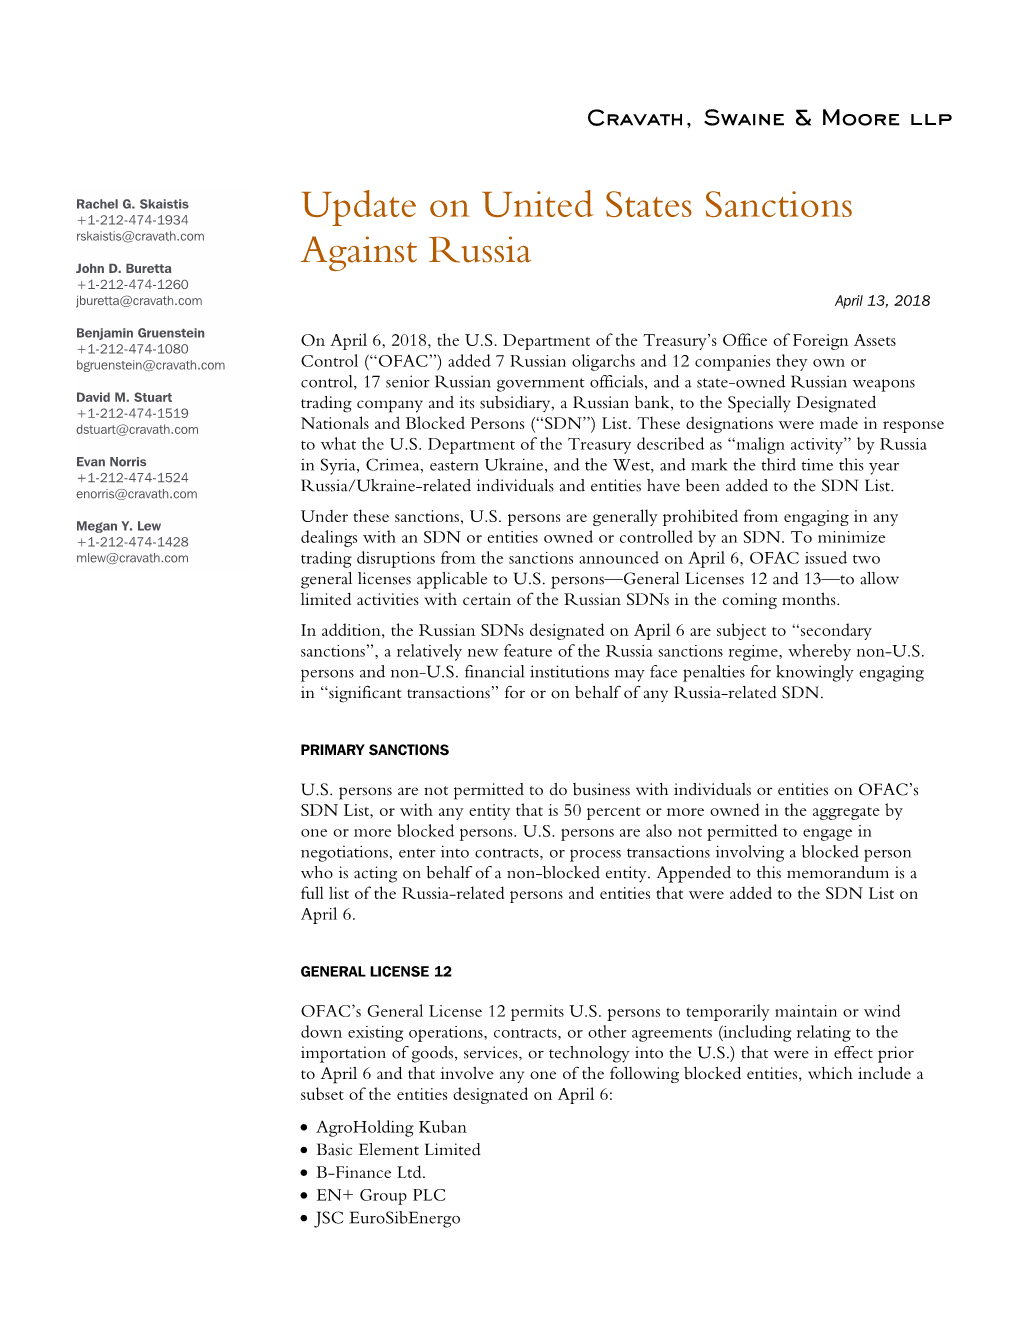 Update on United States Sanctions Against Russia